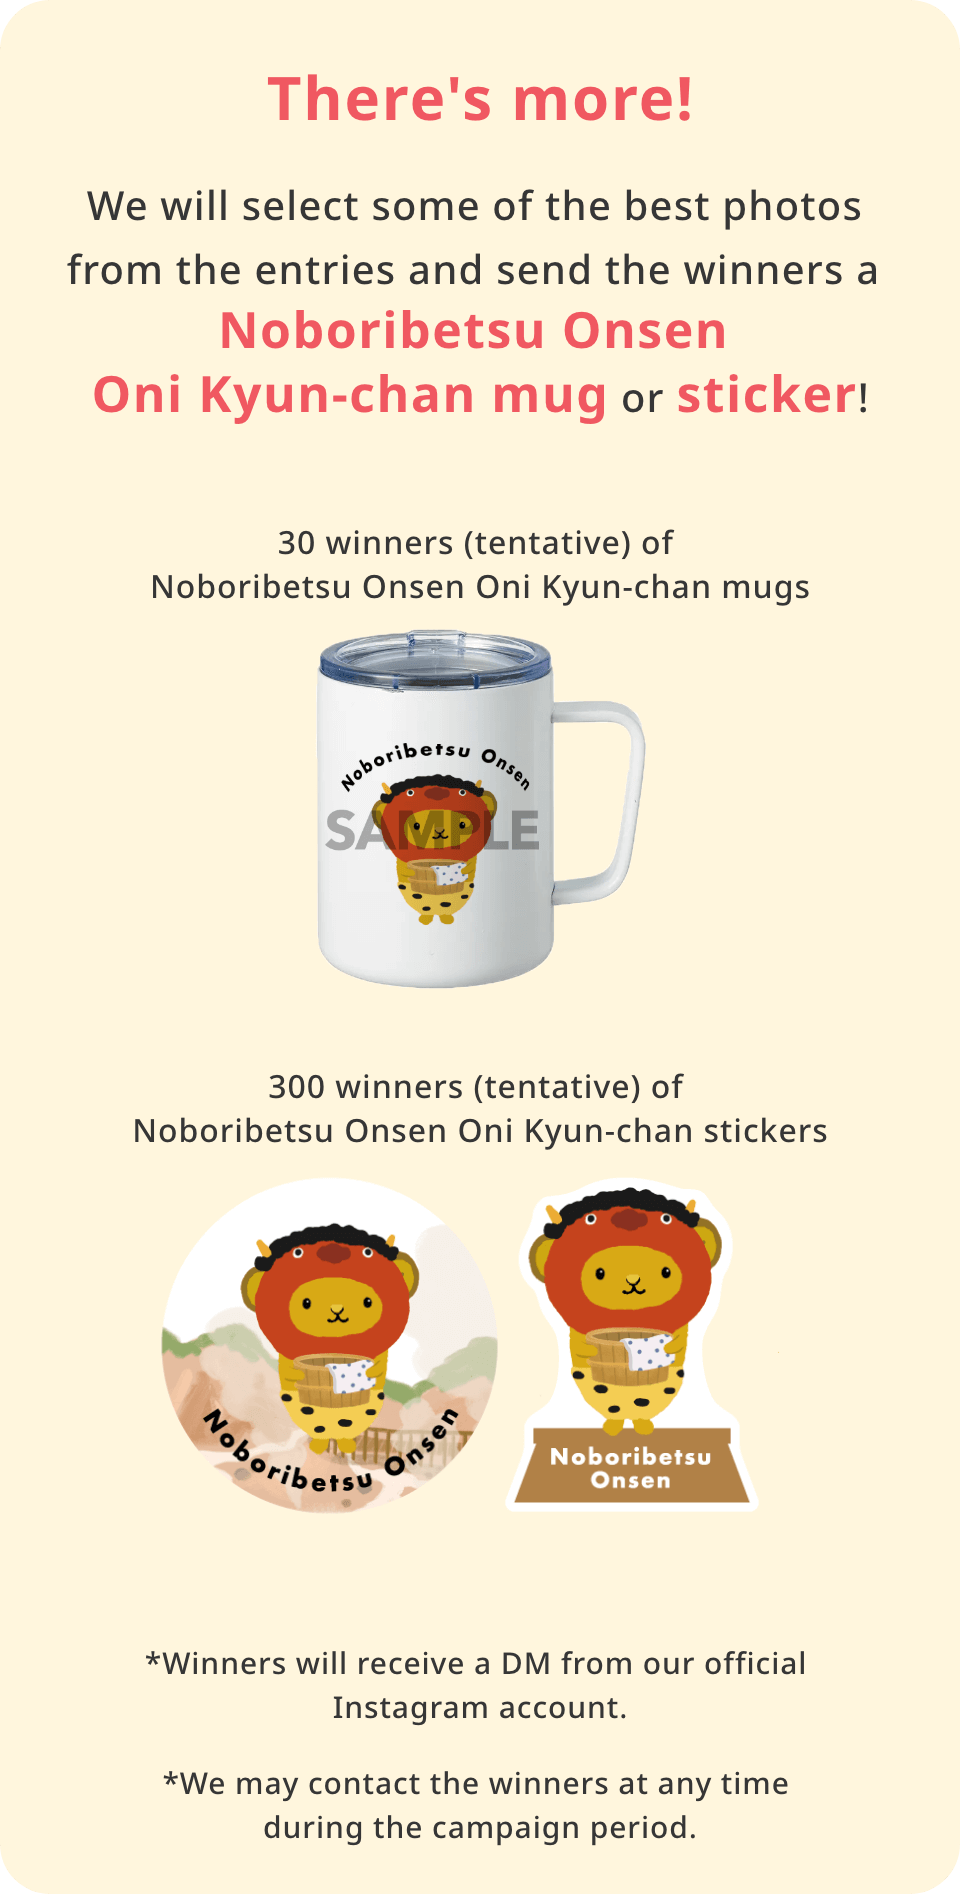 There's more!We will select the best photos from the entries and send a Noboribetsu Onsen Onikyun-chan mug to a few winners each month!